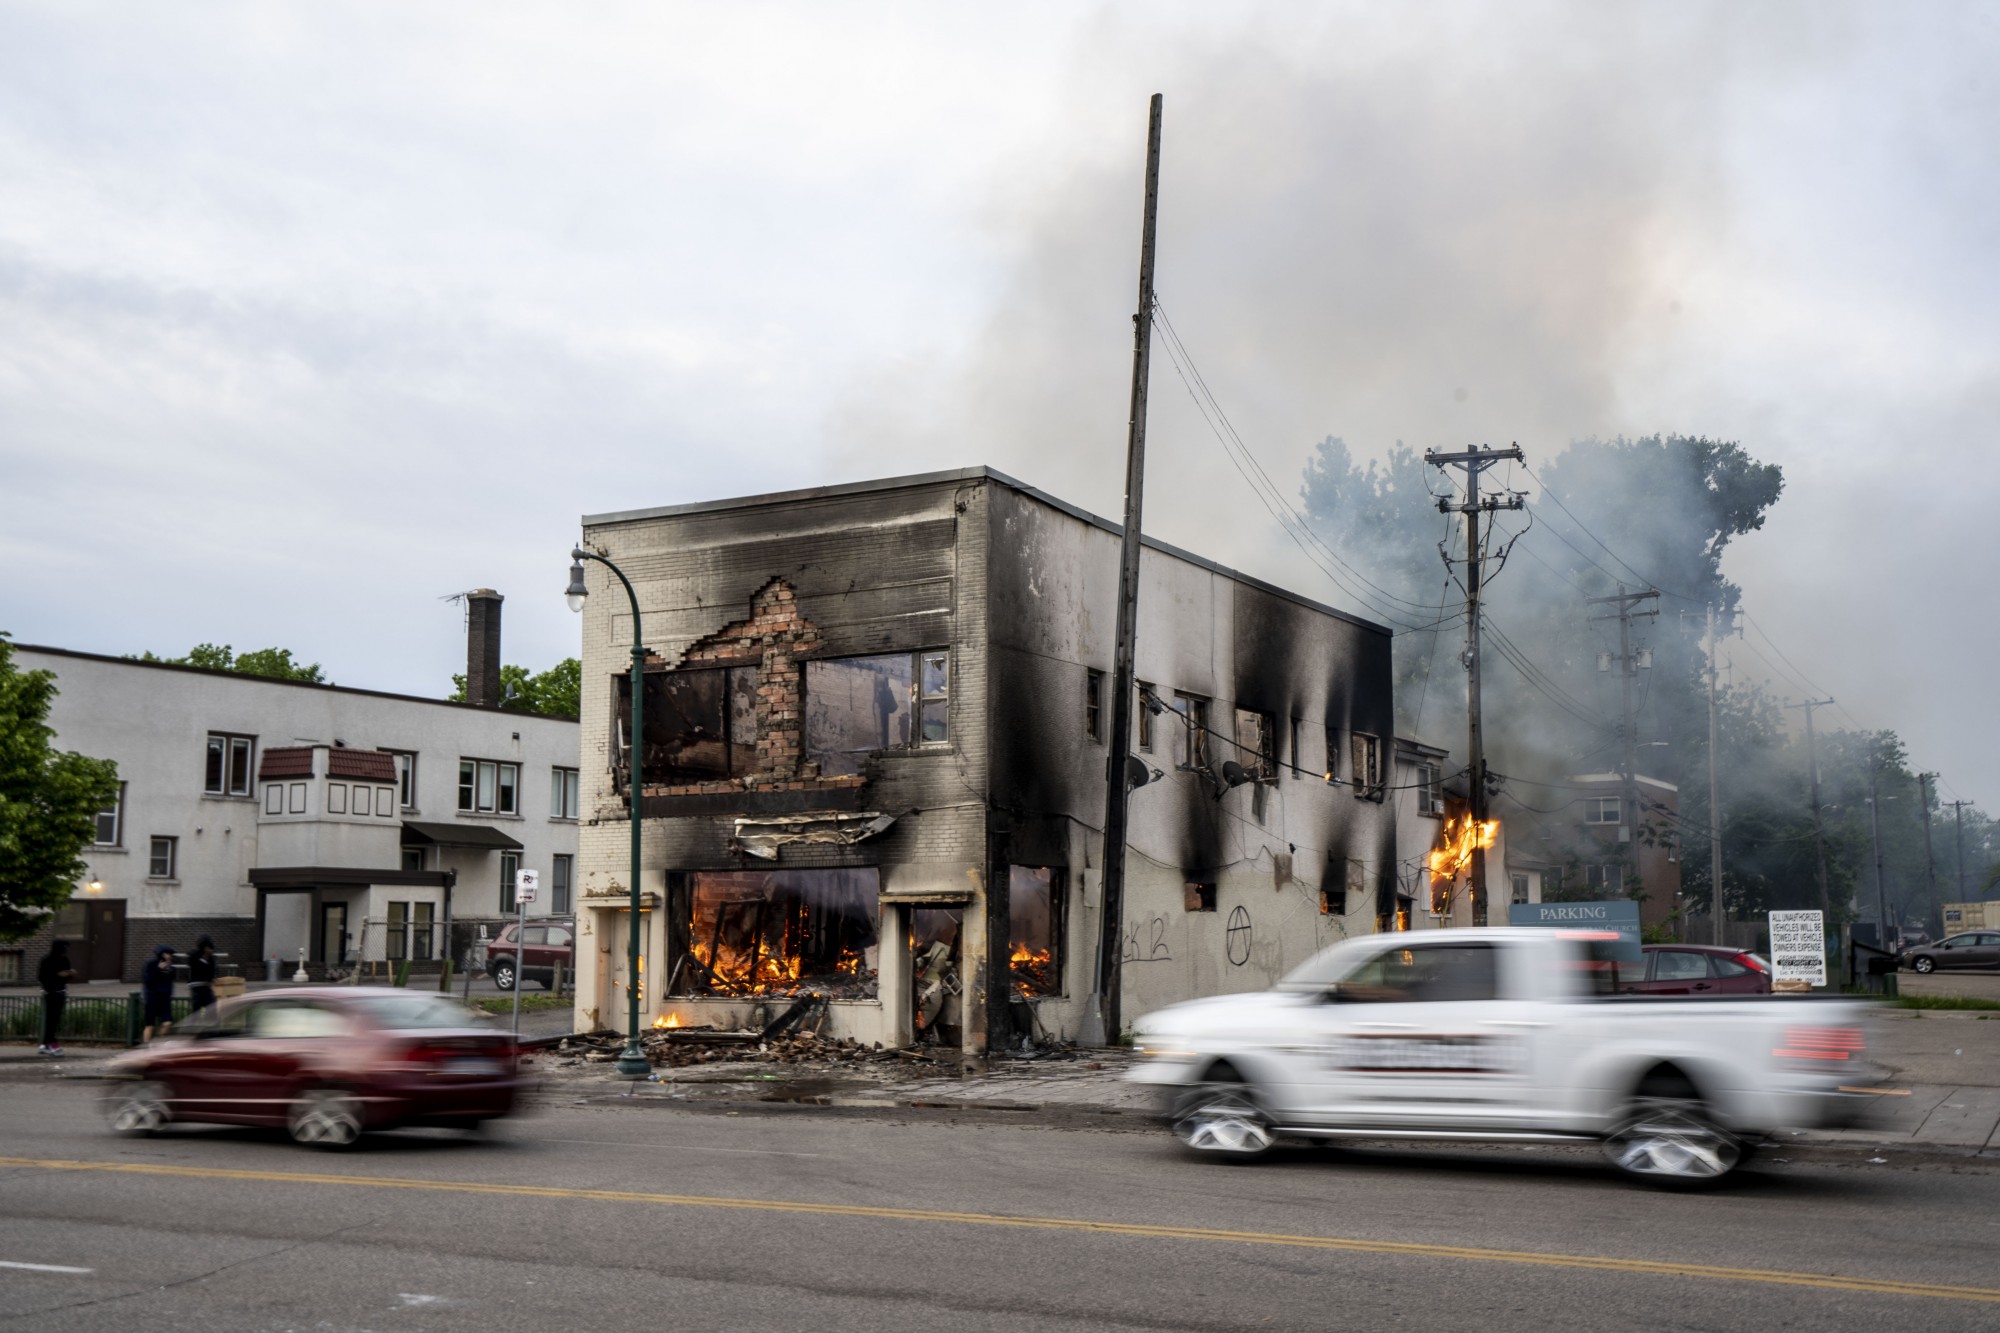 A burned out building is seen the morning after a second night of protests that turned violent near the Minneapolis Police 3rd Precinct following the death of George Floyd. Dozens of businesses were vandalized and firefighters were still working to control several blazes still at hand on Thursday, May 28. 